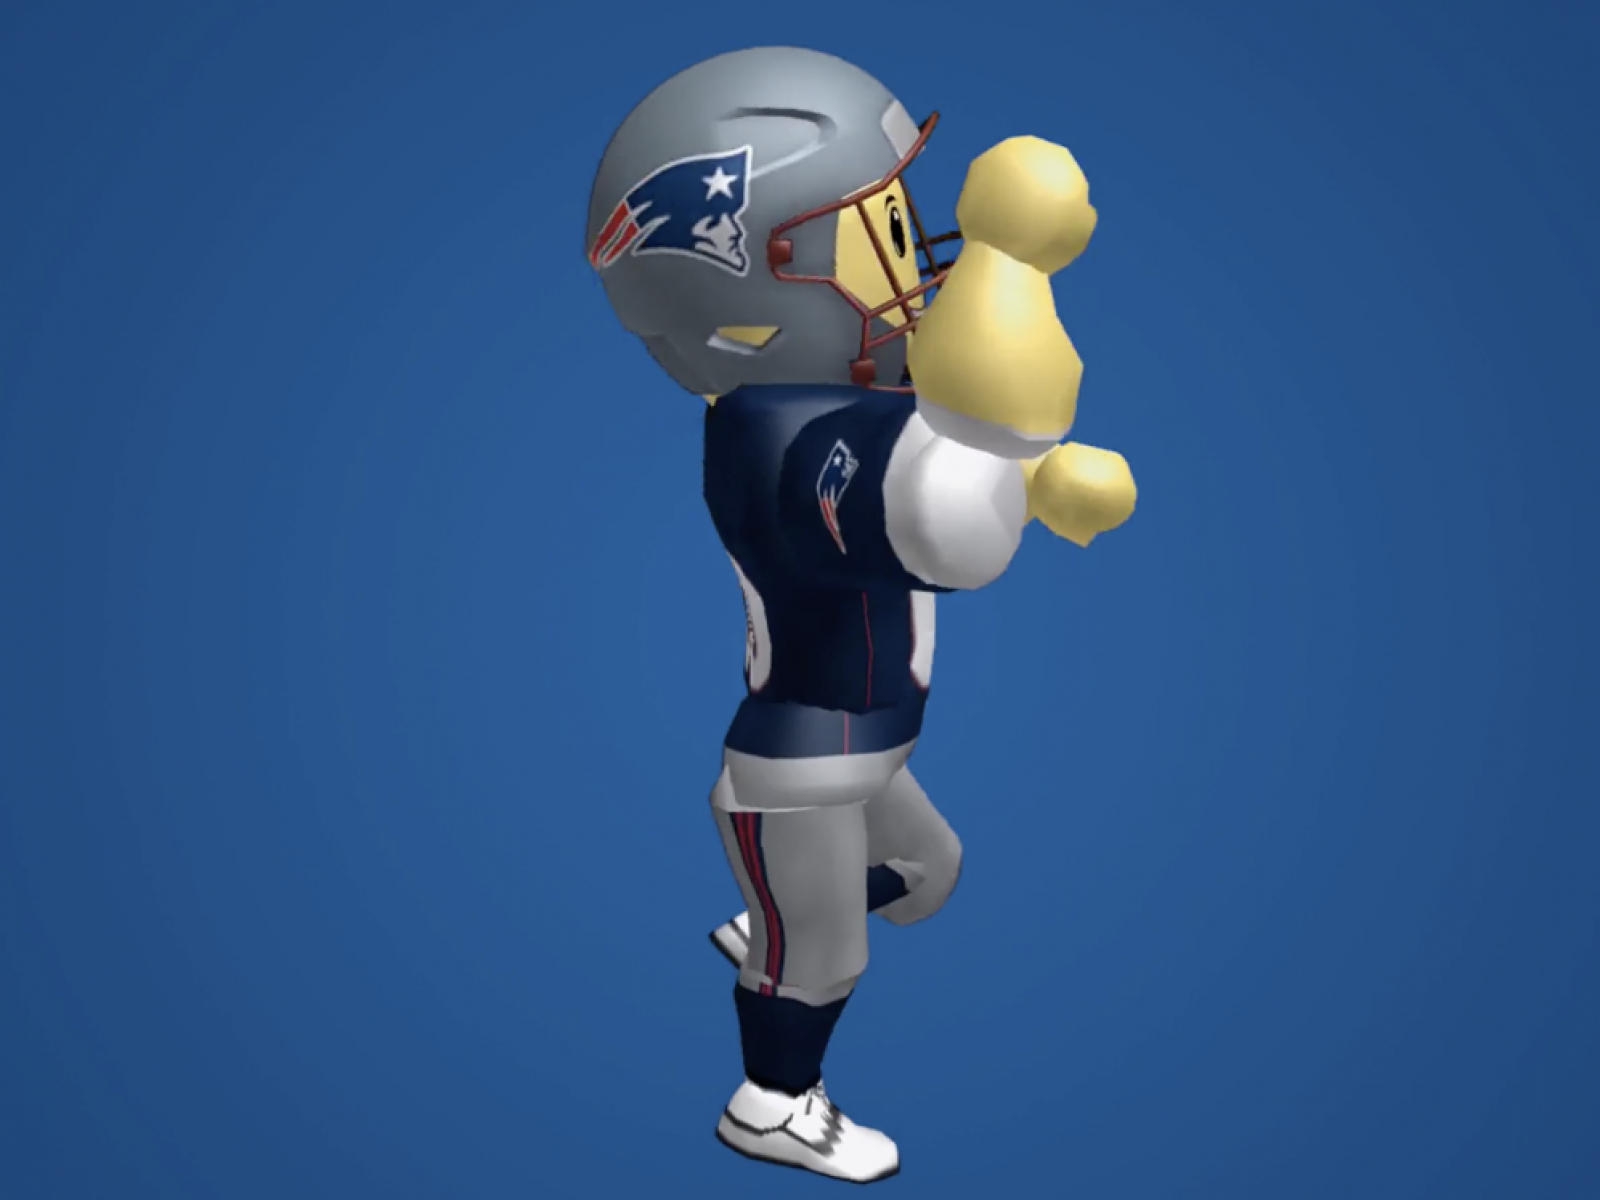 Roblox And Nfl Team Up To Give Players Free Team Helmets - 